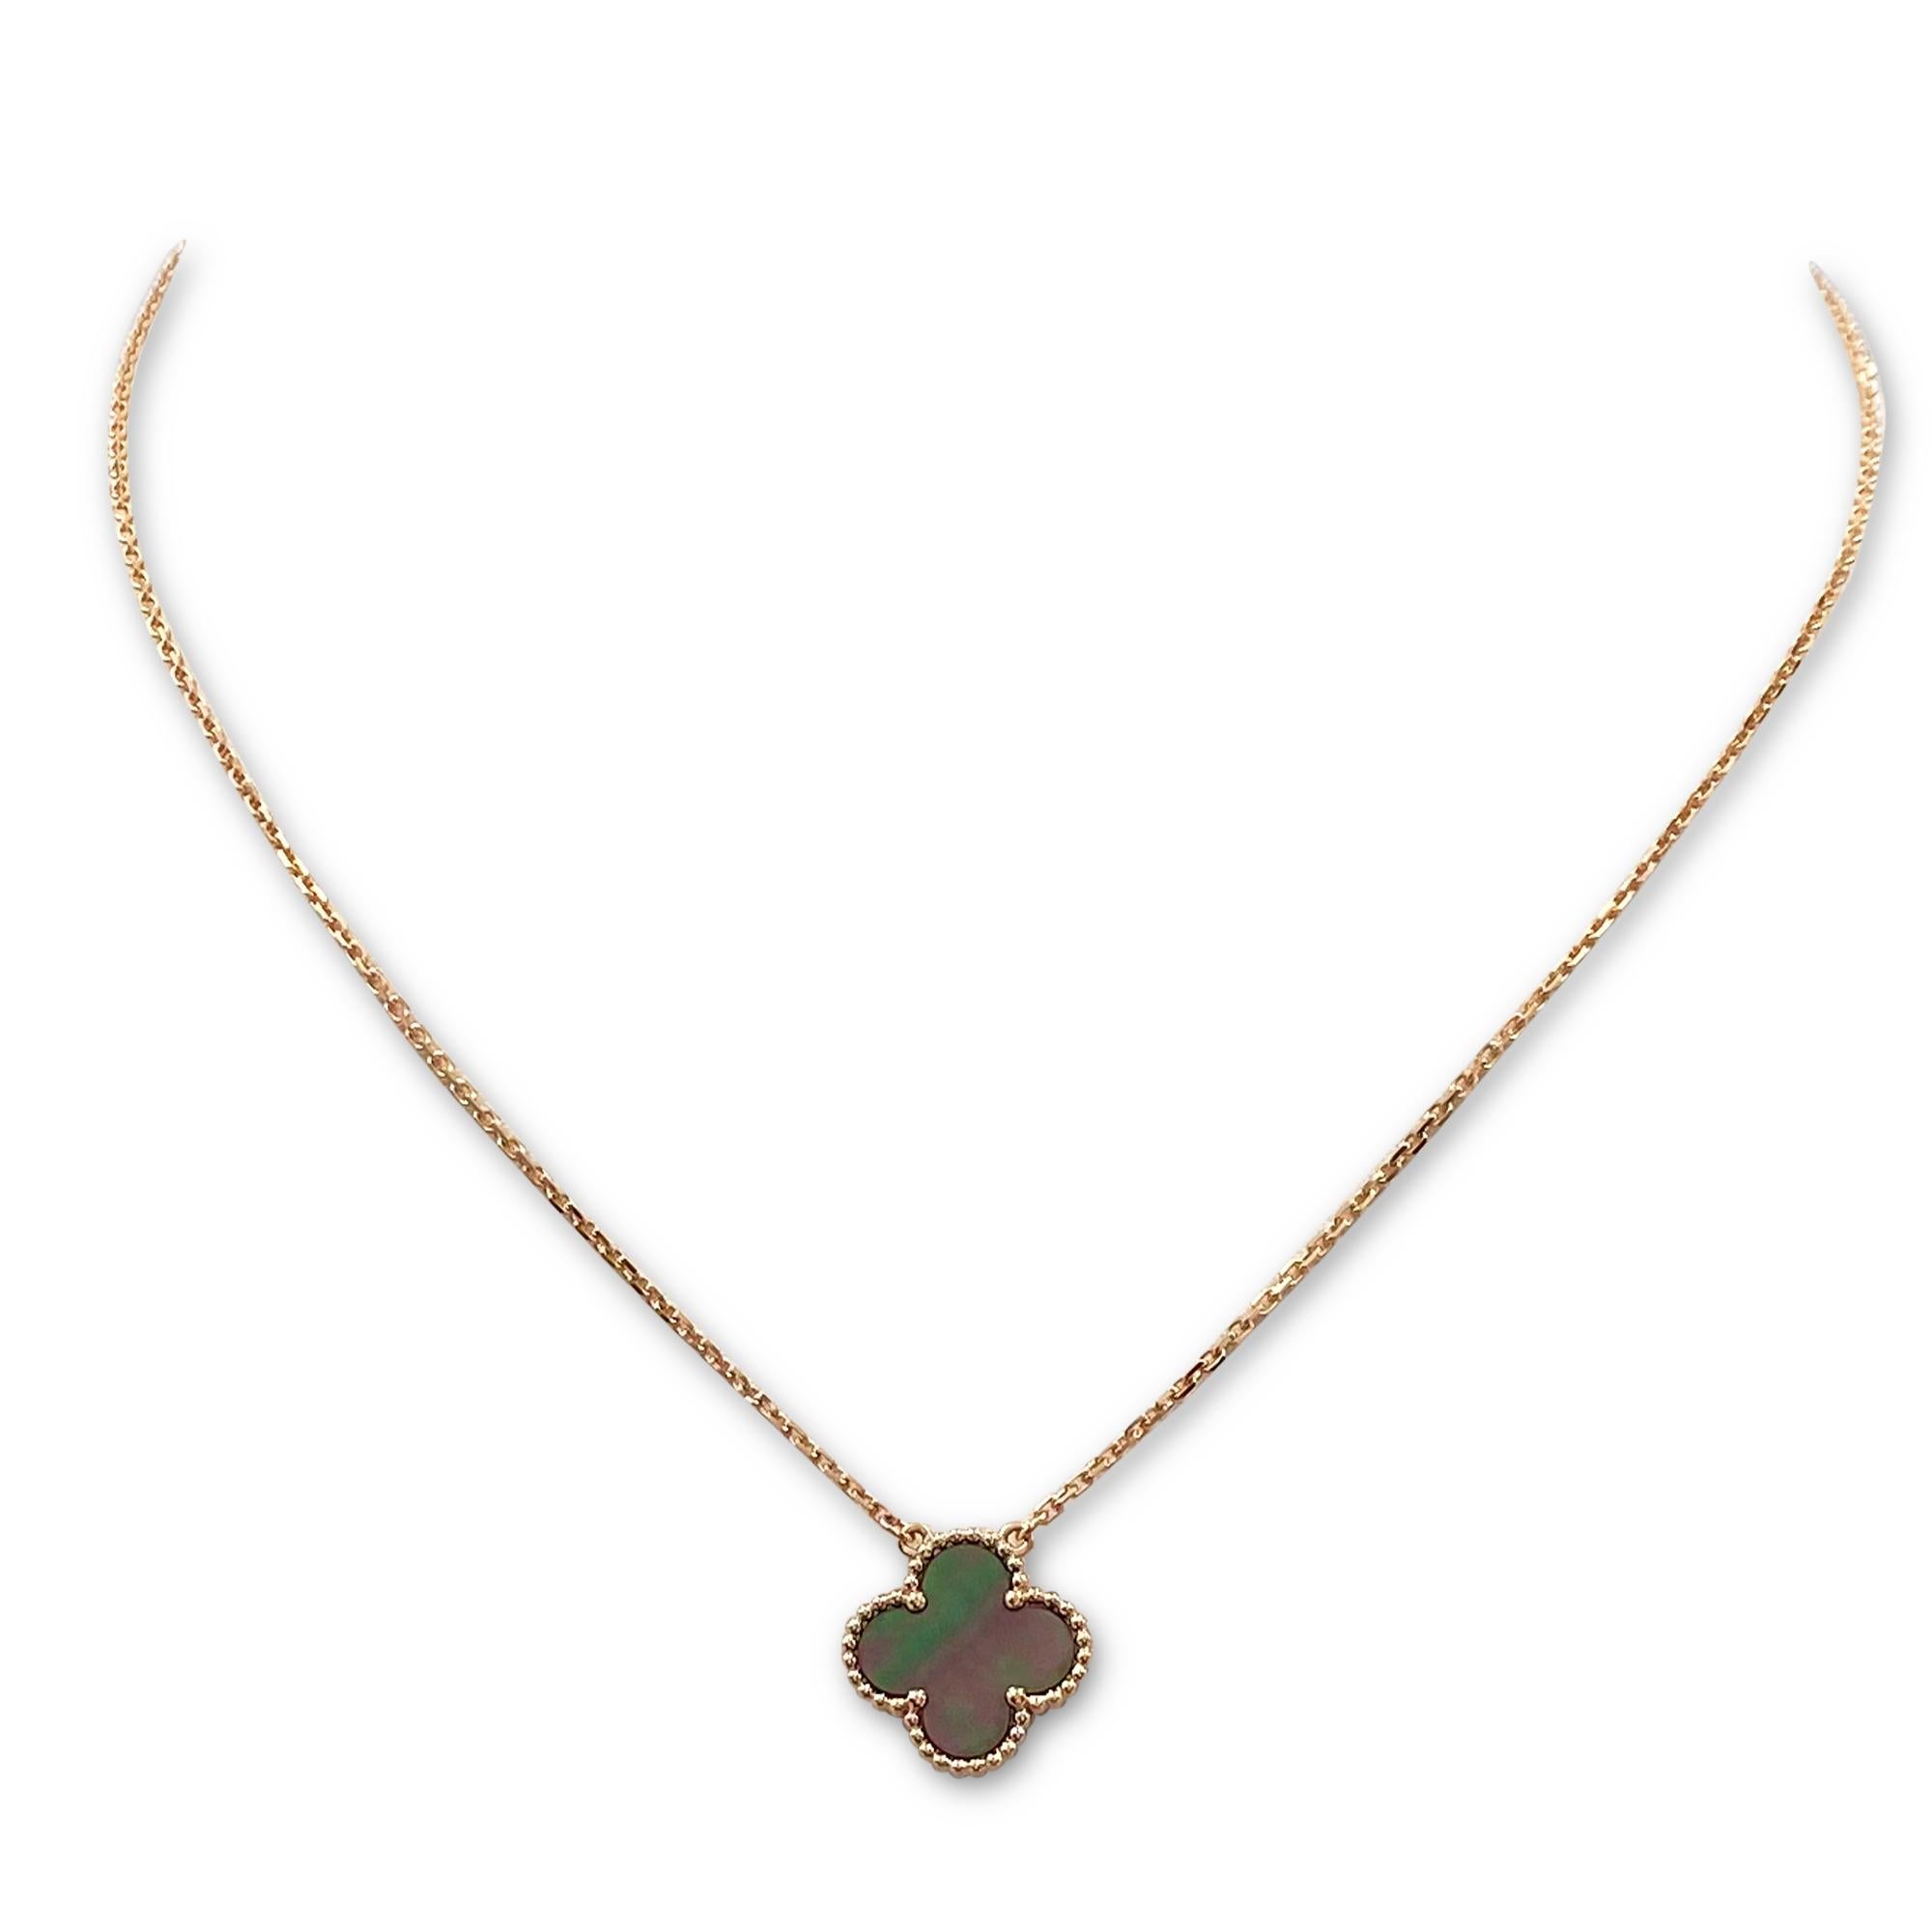 Authentic Van Cleef & Arpels 'Vintage Alhambra' necklace crafted in 18 karat rose gold and featuring one clover-shaped motif in carved mothe of pearl. The pendant hangs from a 16 3/4 inch adjustable chain.  Signed VCA, Au750, with serial number and